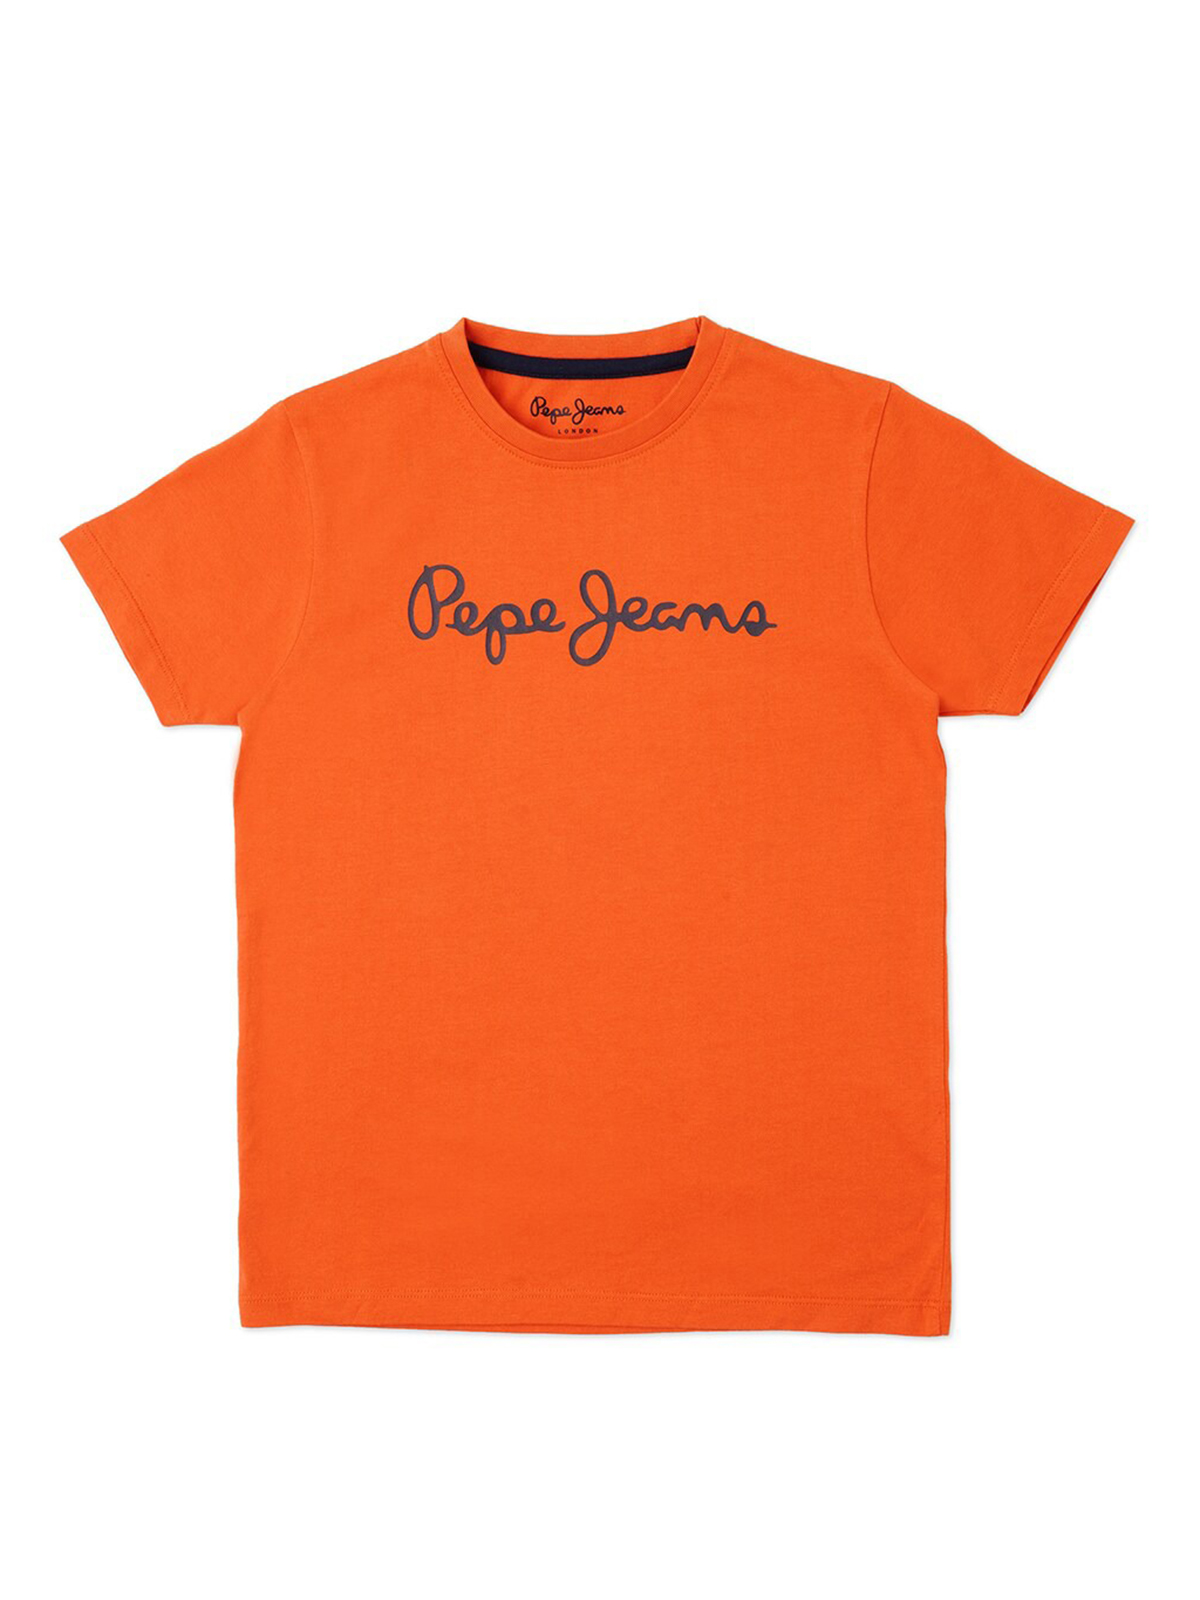 T-Shirts | Cotton Activewear Pepe Jeans Tee | Freeup